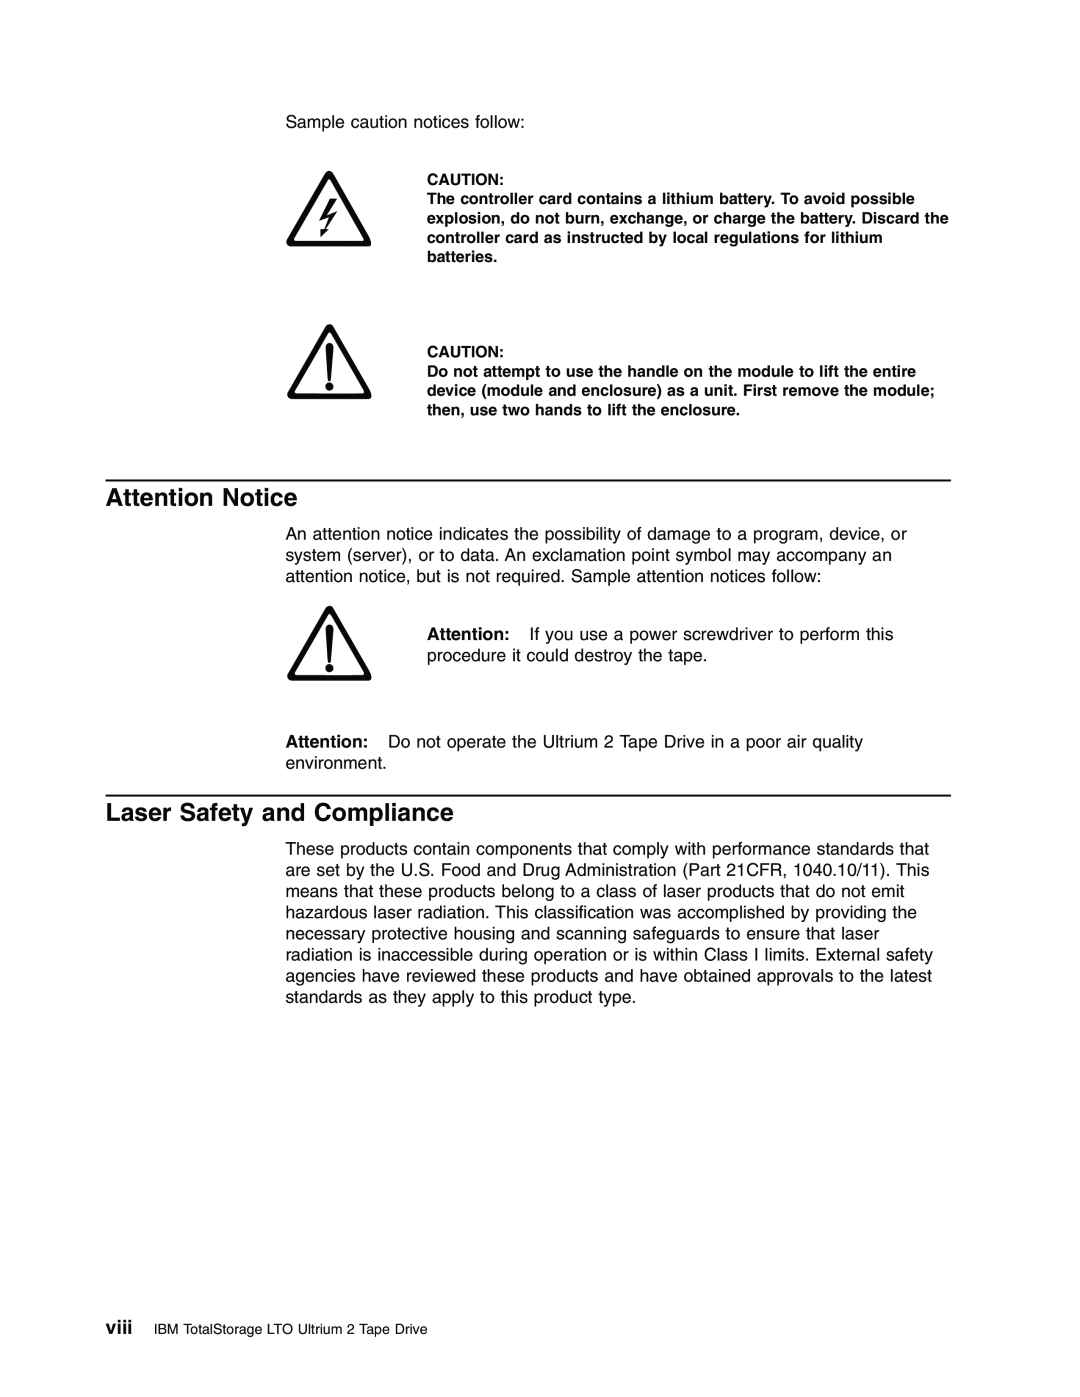 IBM T400F manual Attention Notice, Laser Safety and Compliance 